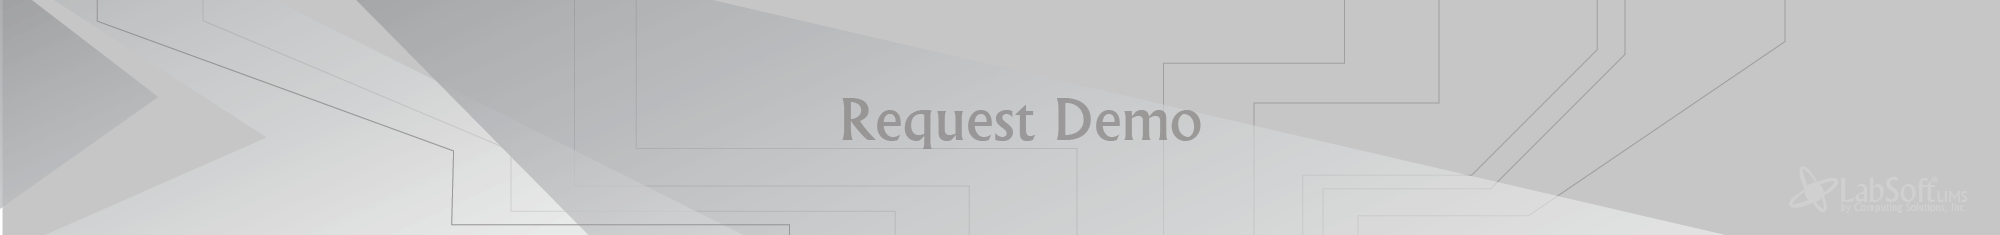 LabSoft LIMS Online Demo Request